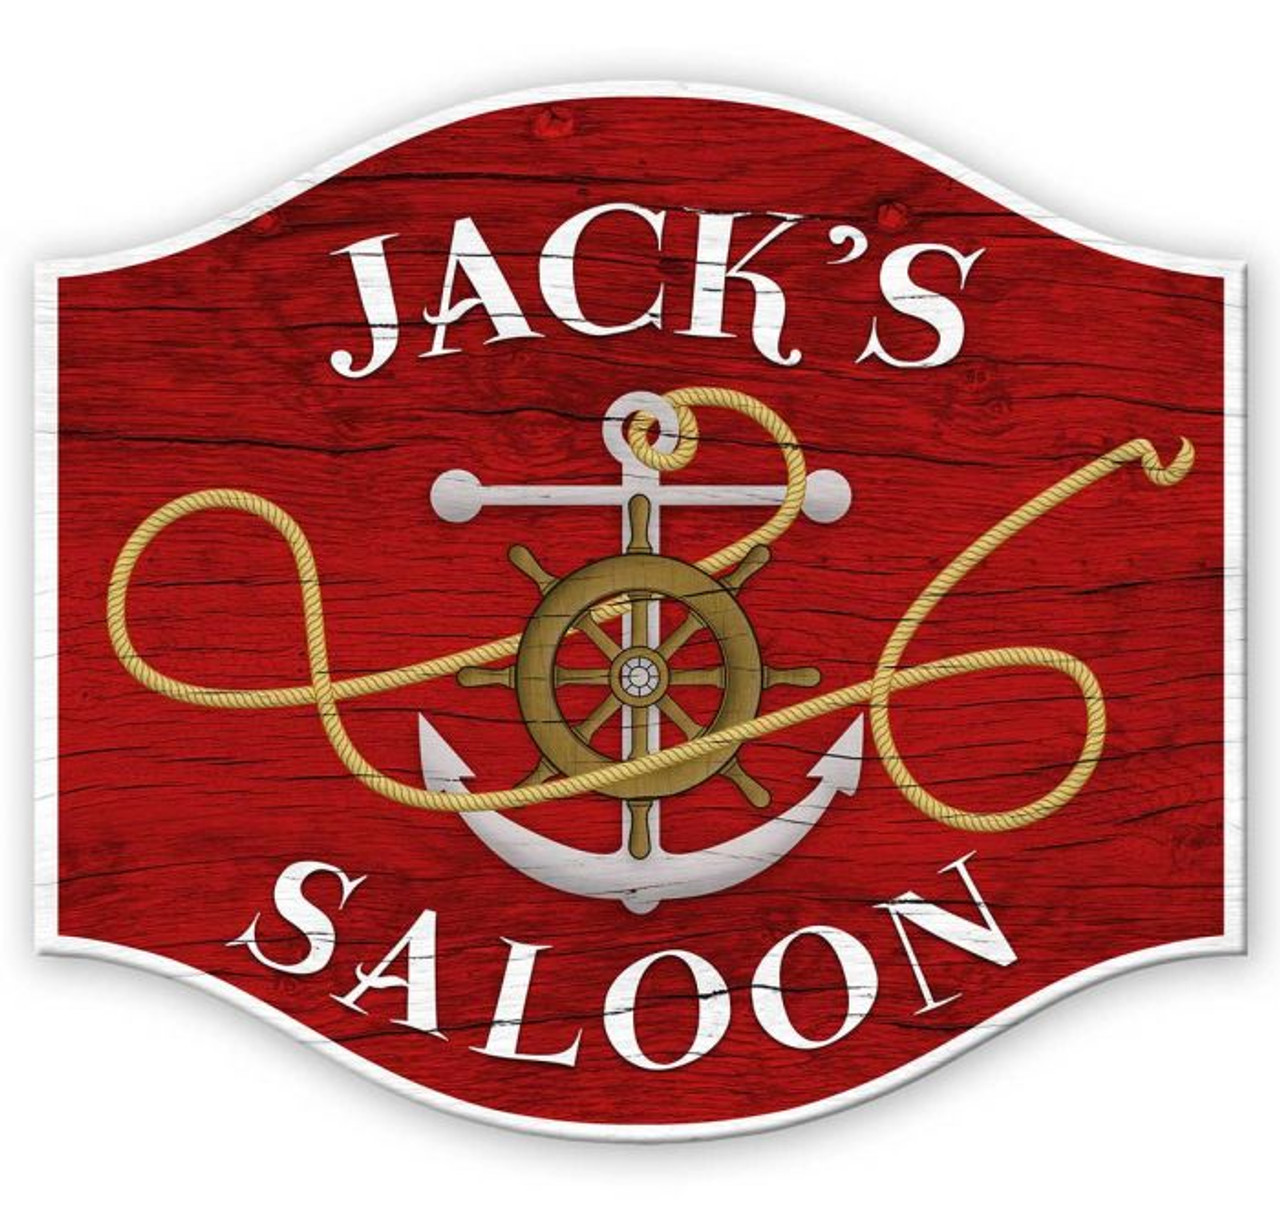 Sailor SaloonMetal Sign - Personalized  18 x 16 Inches